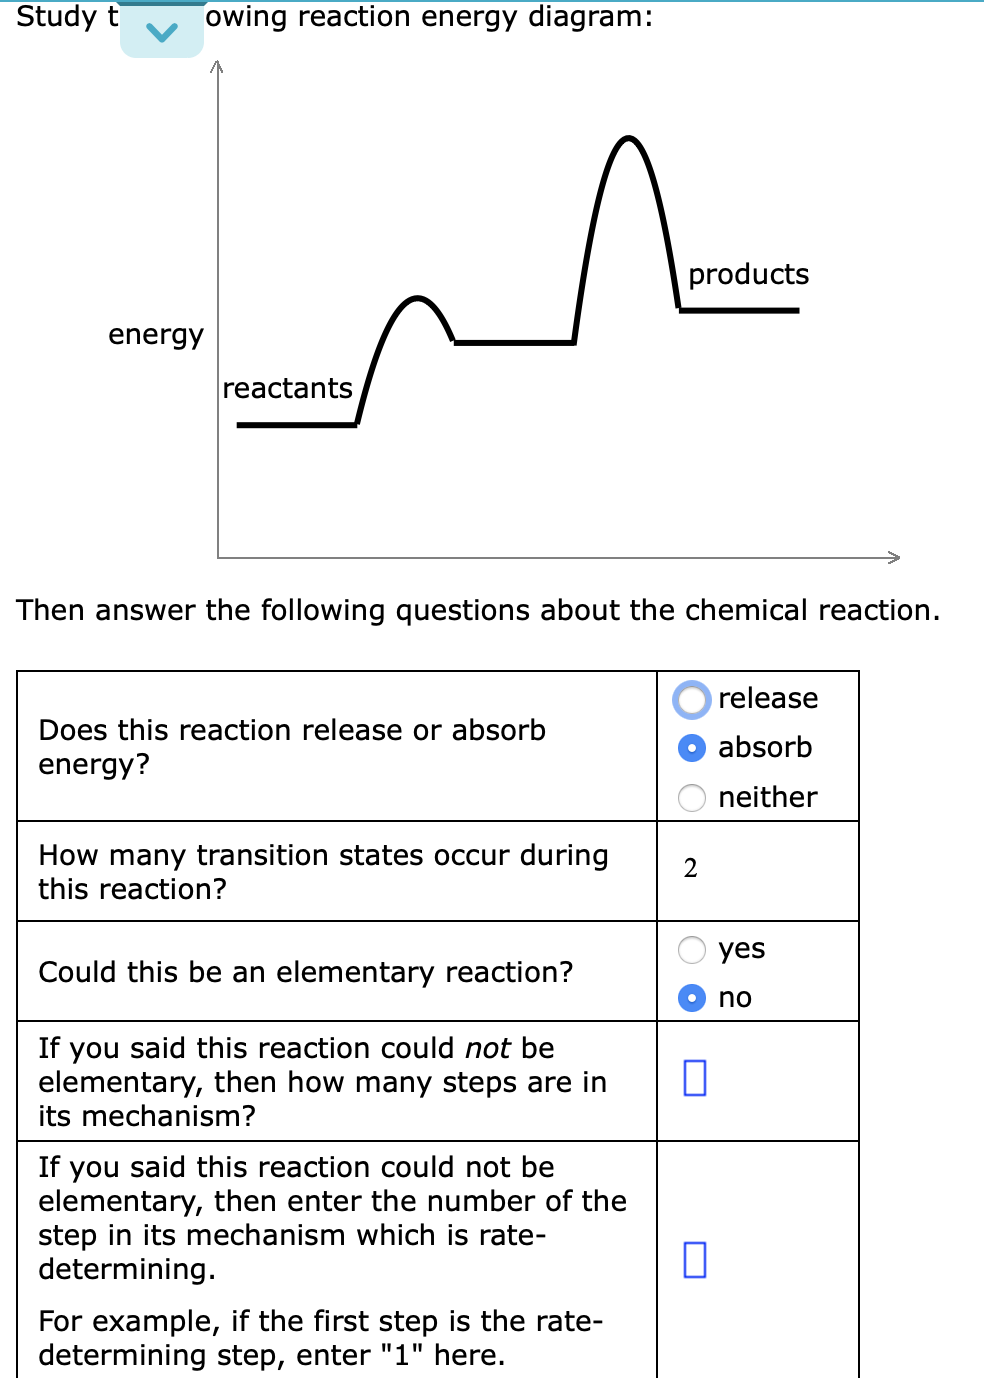 Study t
owing reaction energy diagram:
products
energy
reactants
Then answer the following questions about the chemical reaction.
release
Does this reaction release or absorb
absorb
energy?
neither
How many transition states occur during
this reaction?
2
yes
Could this be an elementary reaction?
no
If you said this reaction could not be
elementary, then how many steps are in
its mechanism?
If you said this reaction could not be
elementary, then enter the number of the
step in its mechanism which is rate-
determining.
For example, if the first step is the rate-
determining step, enter "1" here.
